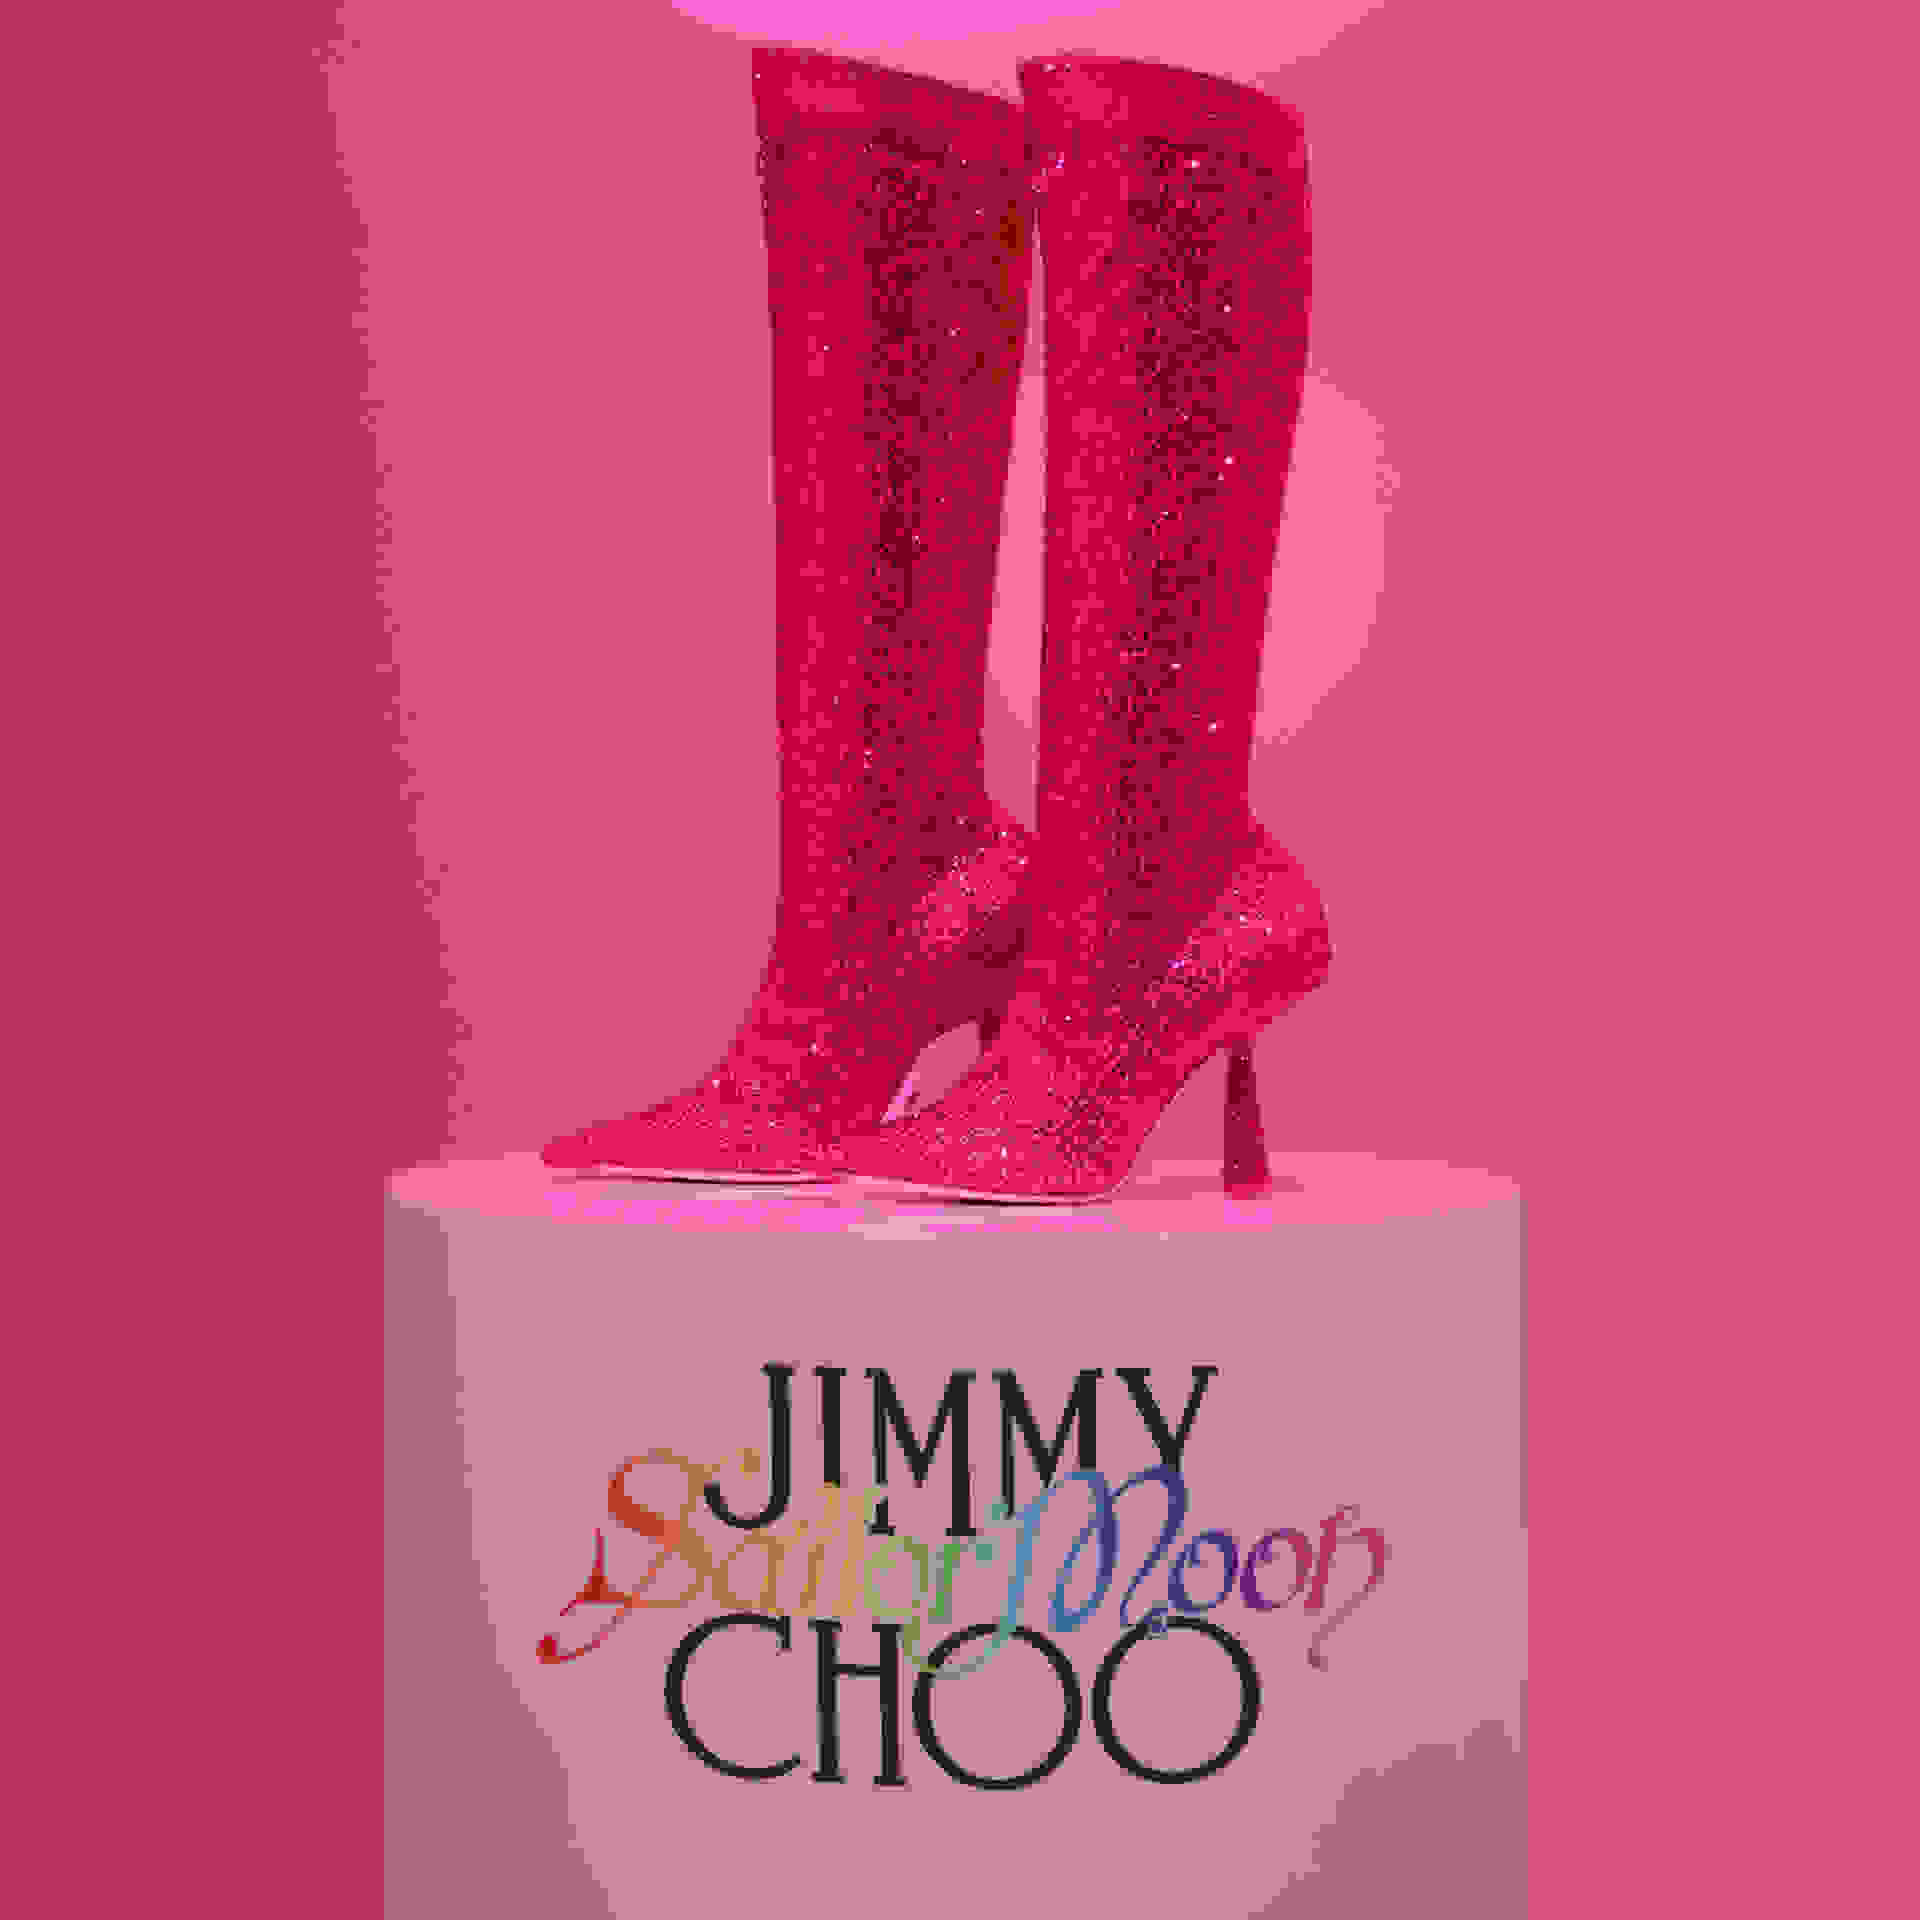 Jimmy Choo x Pretty Guadian Sailor Moon: An Exclusive Collaboration